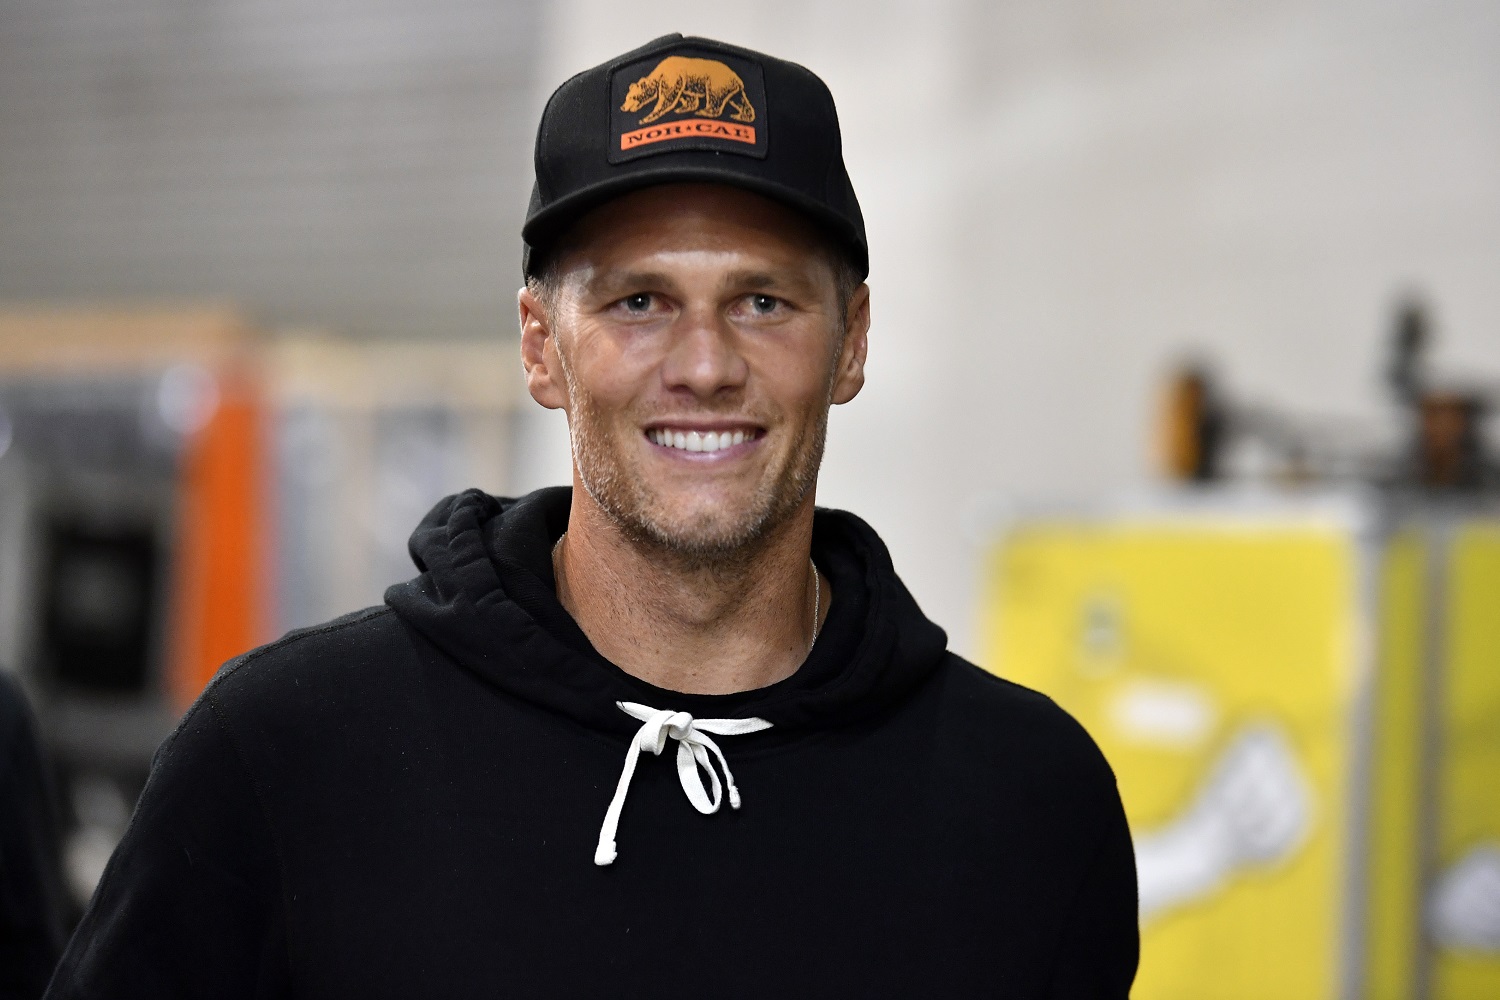 Tampa Bay Buccaneers quarterback Tom Brady is now a celebrity endorser for the Subway sandwich shops chain. | Chris Unger/Zuffa LLC